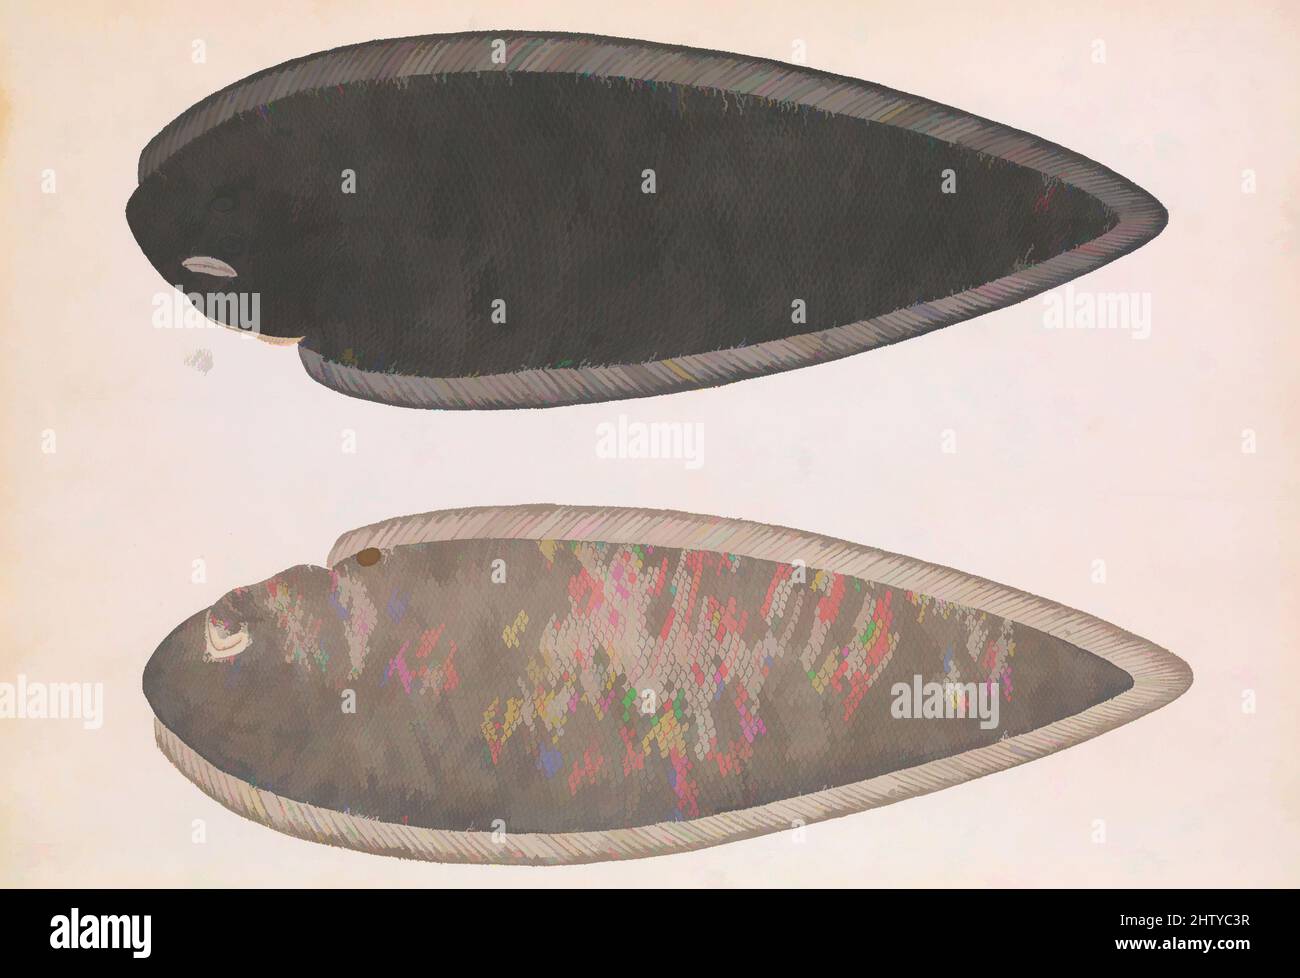 Art inspired by Two Sides of a Bengal River Fish, ca. 1804, Made in India, Calcutta, Pencil, opaque watercolor, and gold on paper, Painting: H. 15 1/16 (38.3 cm), Codices, This painting most likely illustrates a Bengal tongue sole fish (Cynoglossus cynoglossus), so-called for its, Classic works modernized by Artotop with a splash of modernity. Shapes, color and value, eye-catching visual impact on art. Emotions through freedom of artworks in a contemporary way. A timeless message pursuing a wildly creative new direction. Artists turning to the digital medium and creating the Artotop NFT Stock Photo